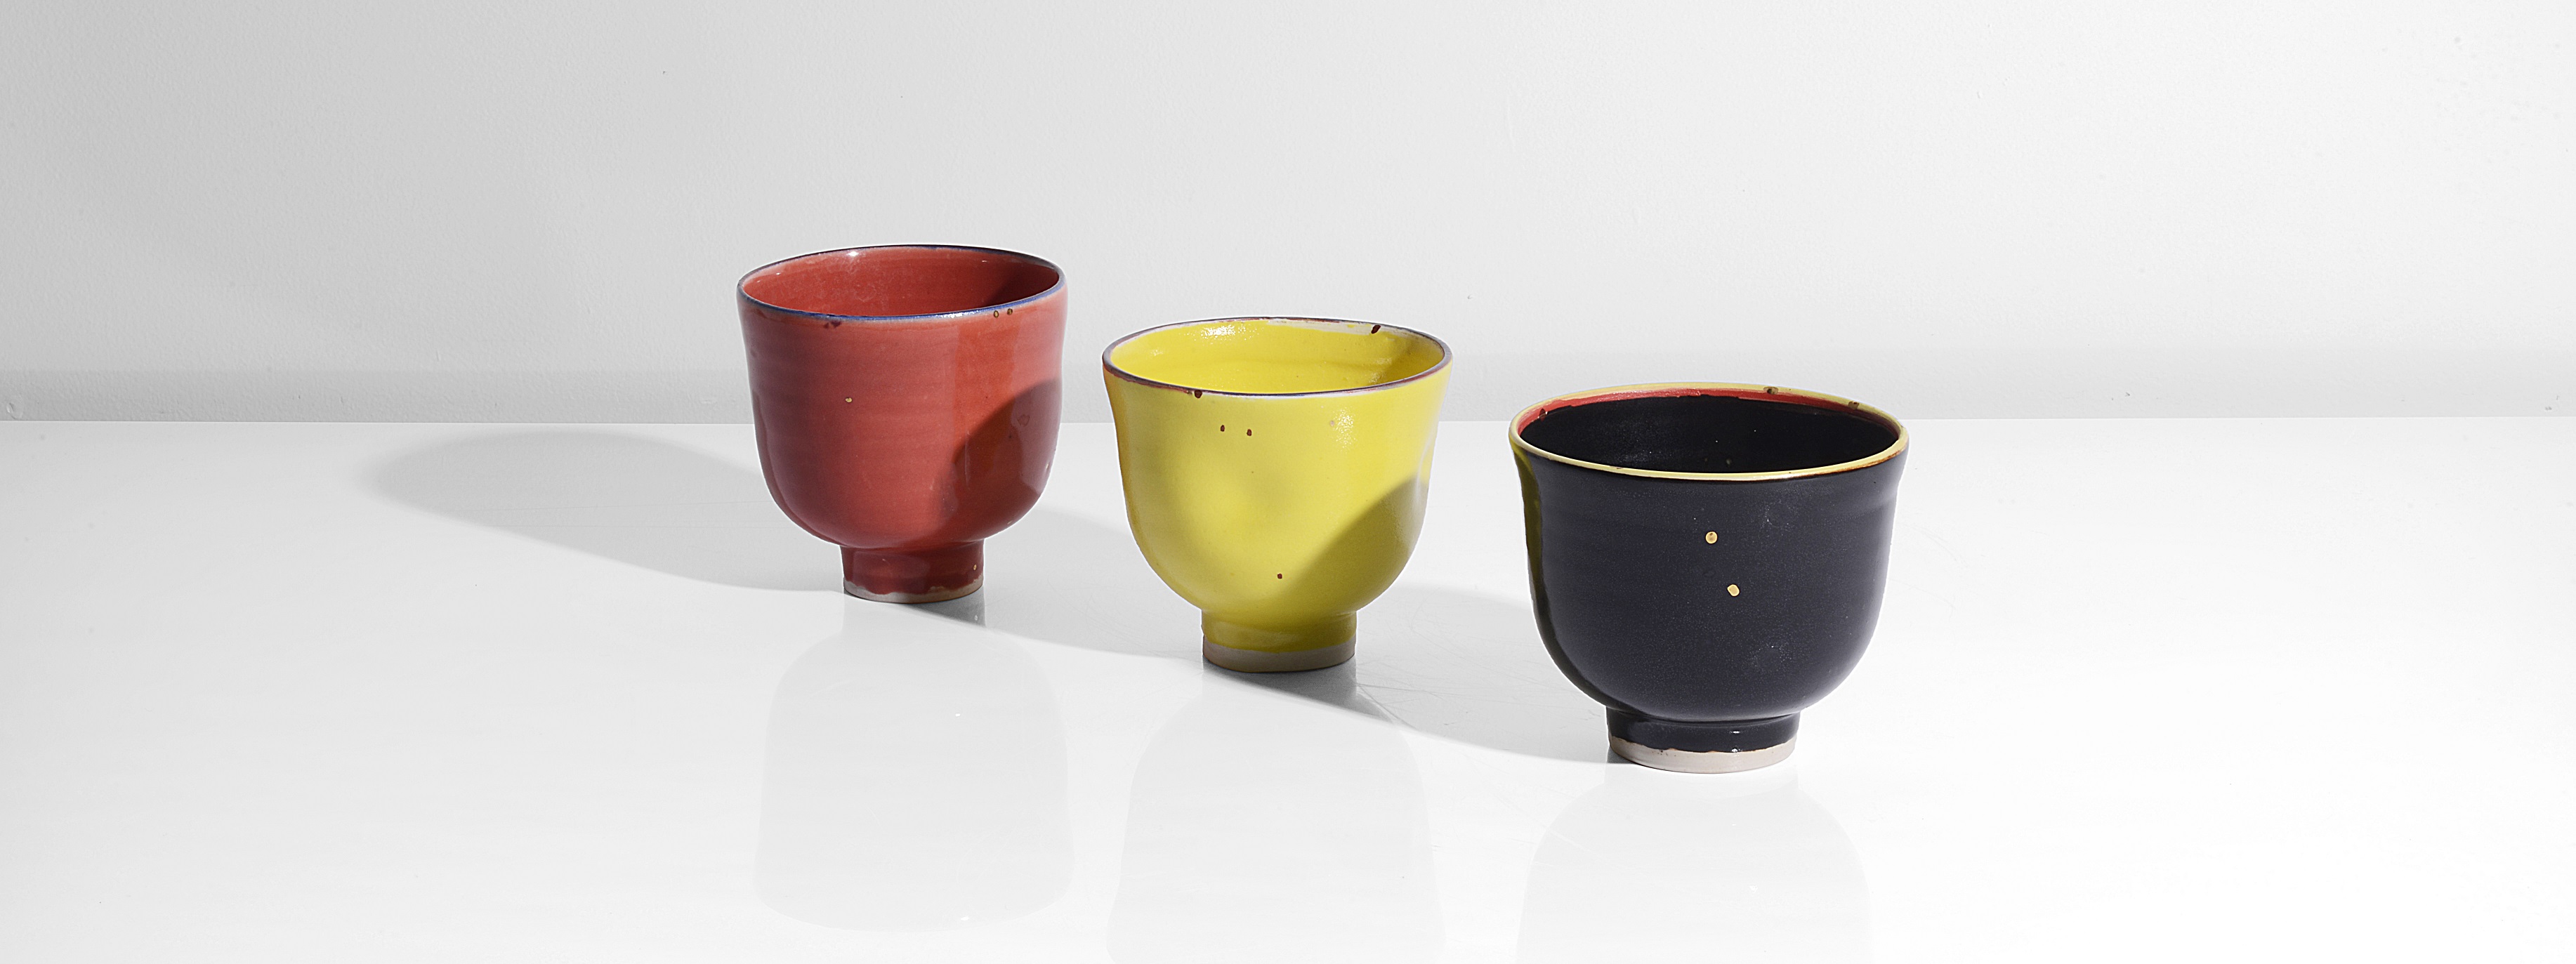 Three porcelain teabowls made by Emmanuel Cooper sold at auction by Maak Contemporary Ceramics